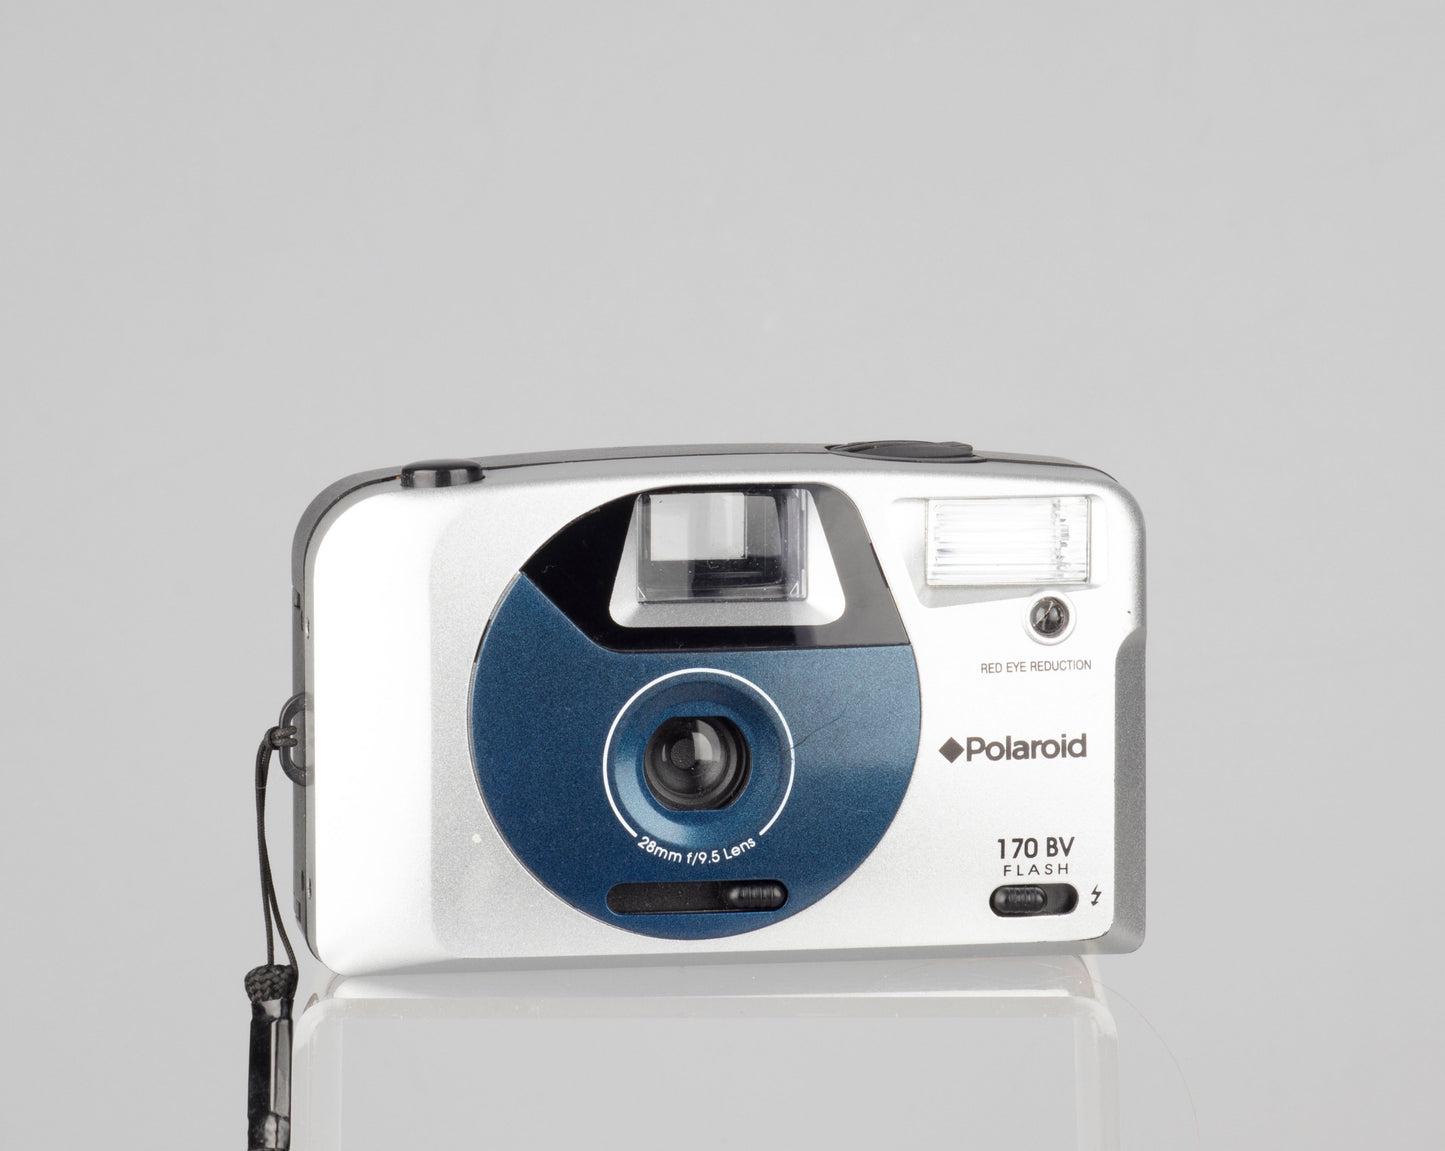 The Polaroid 170BV is a relatively basic 35mm point-and-shoot from the early aughts featuring a wide angle lens